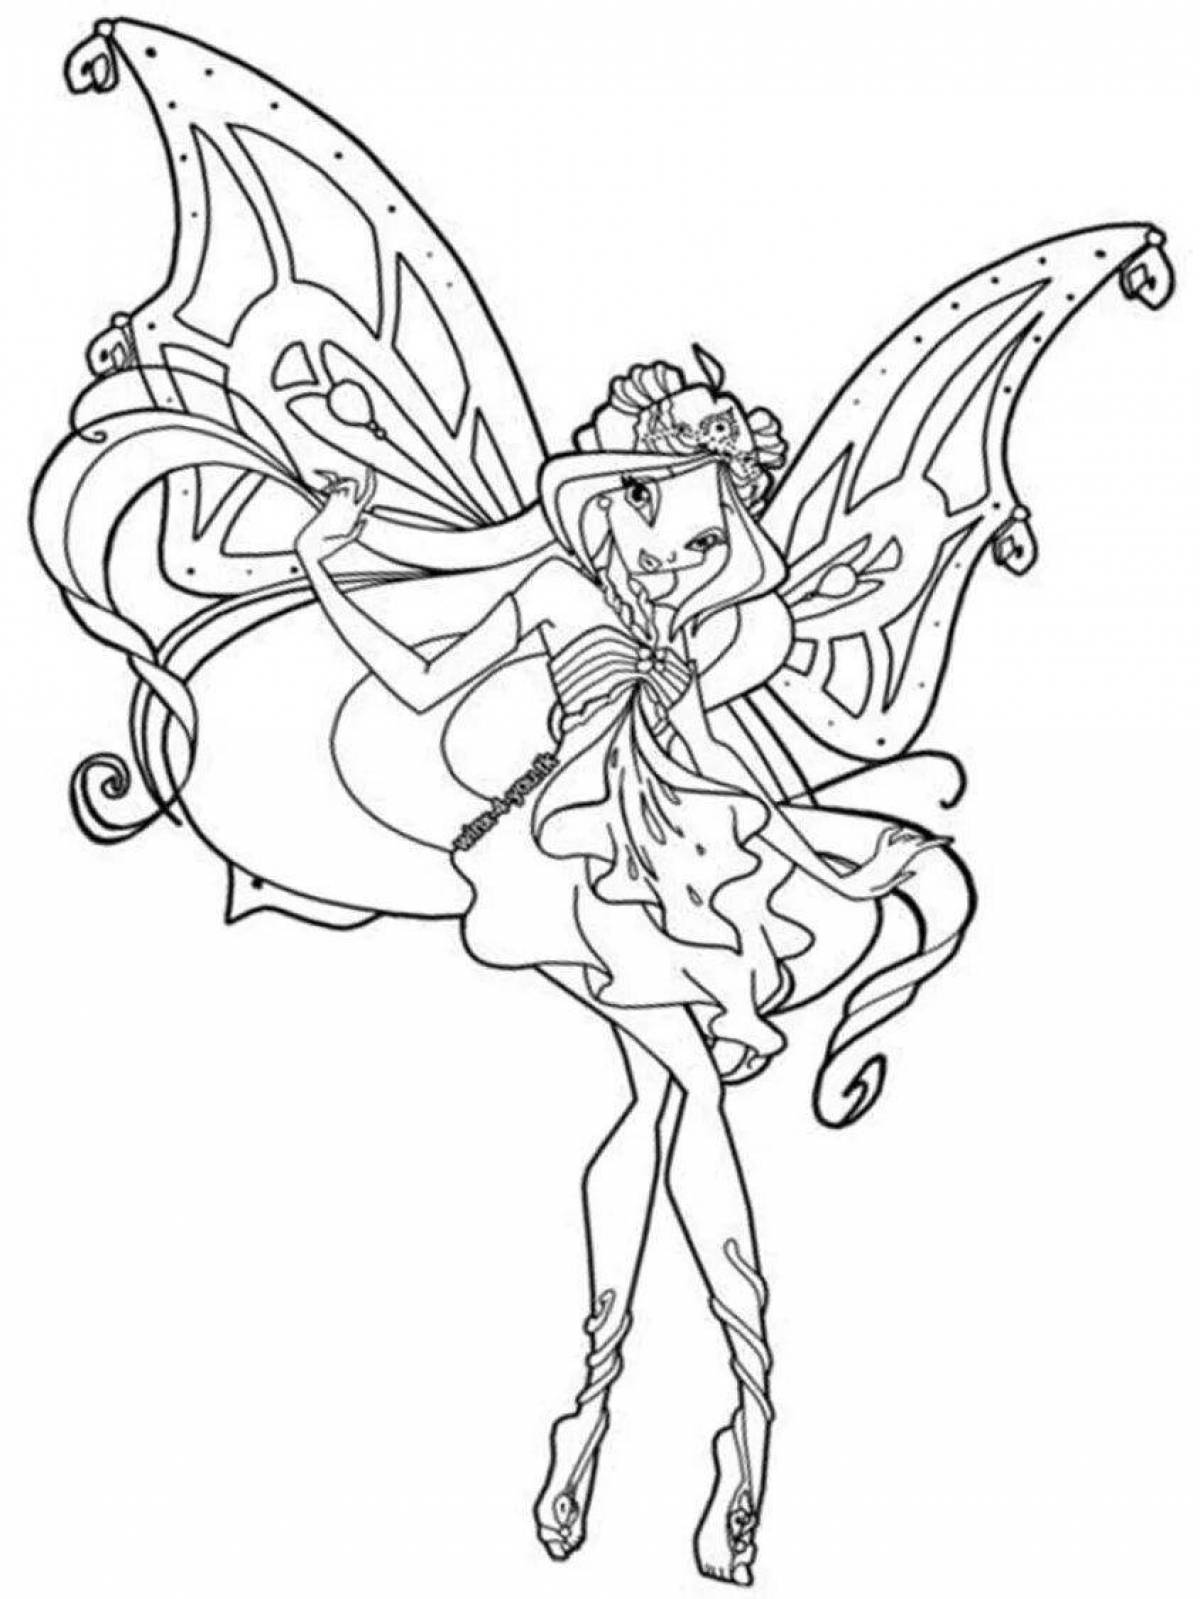 Magic winx coloring for girls fairies